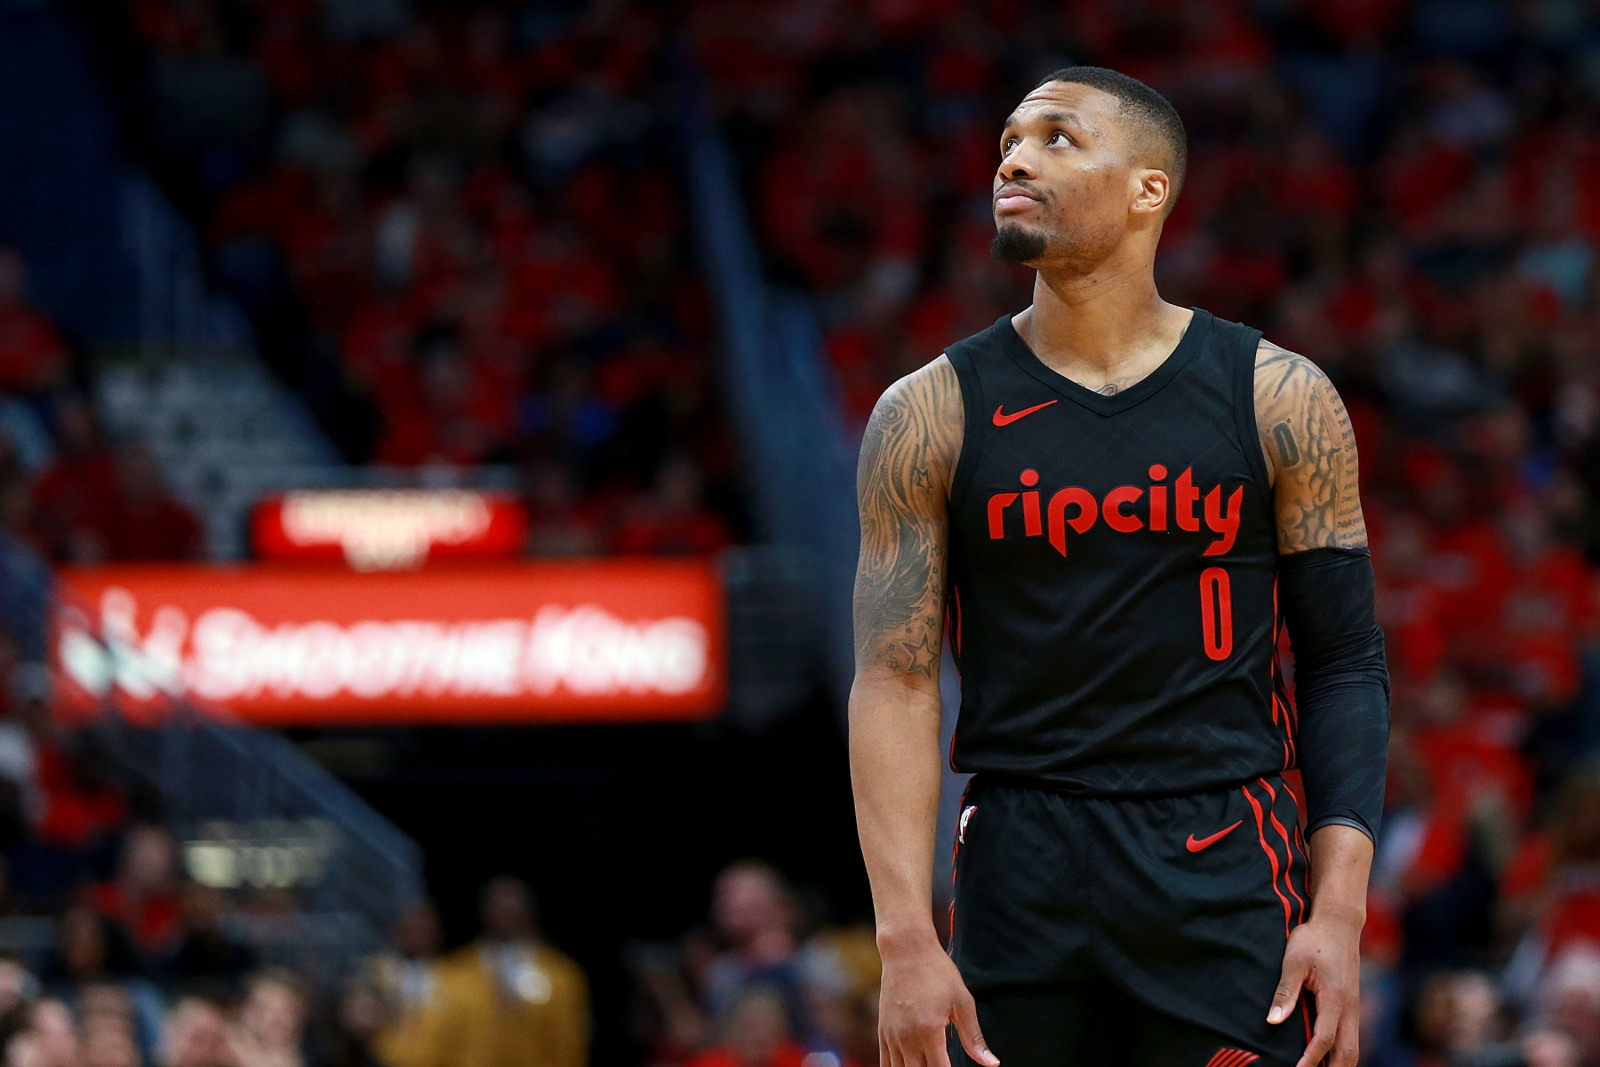 Four Trail Blazers crack Sports Illustrated's Top 100